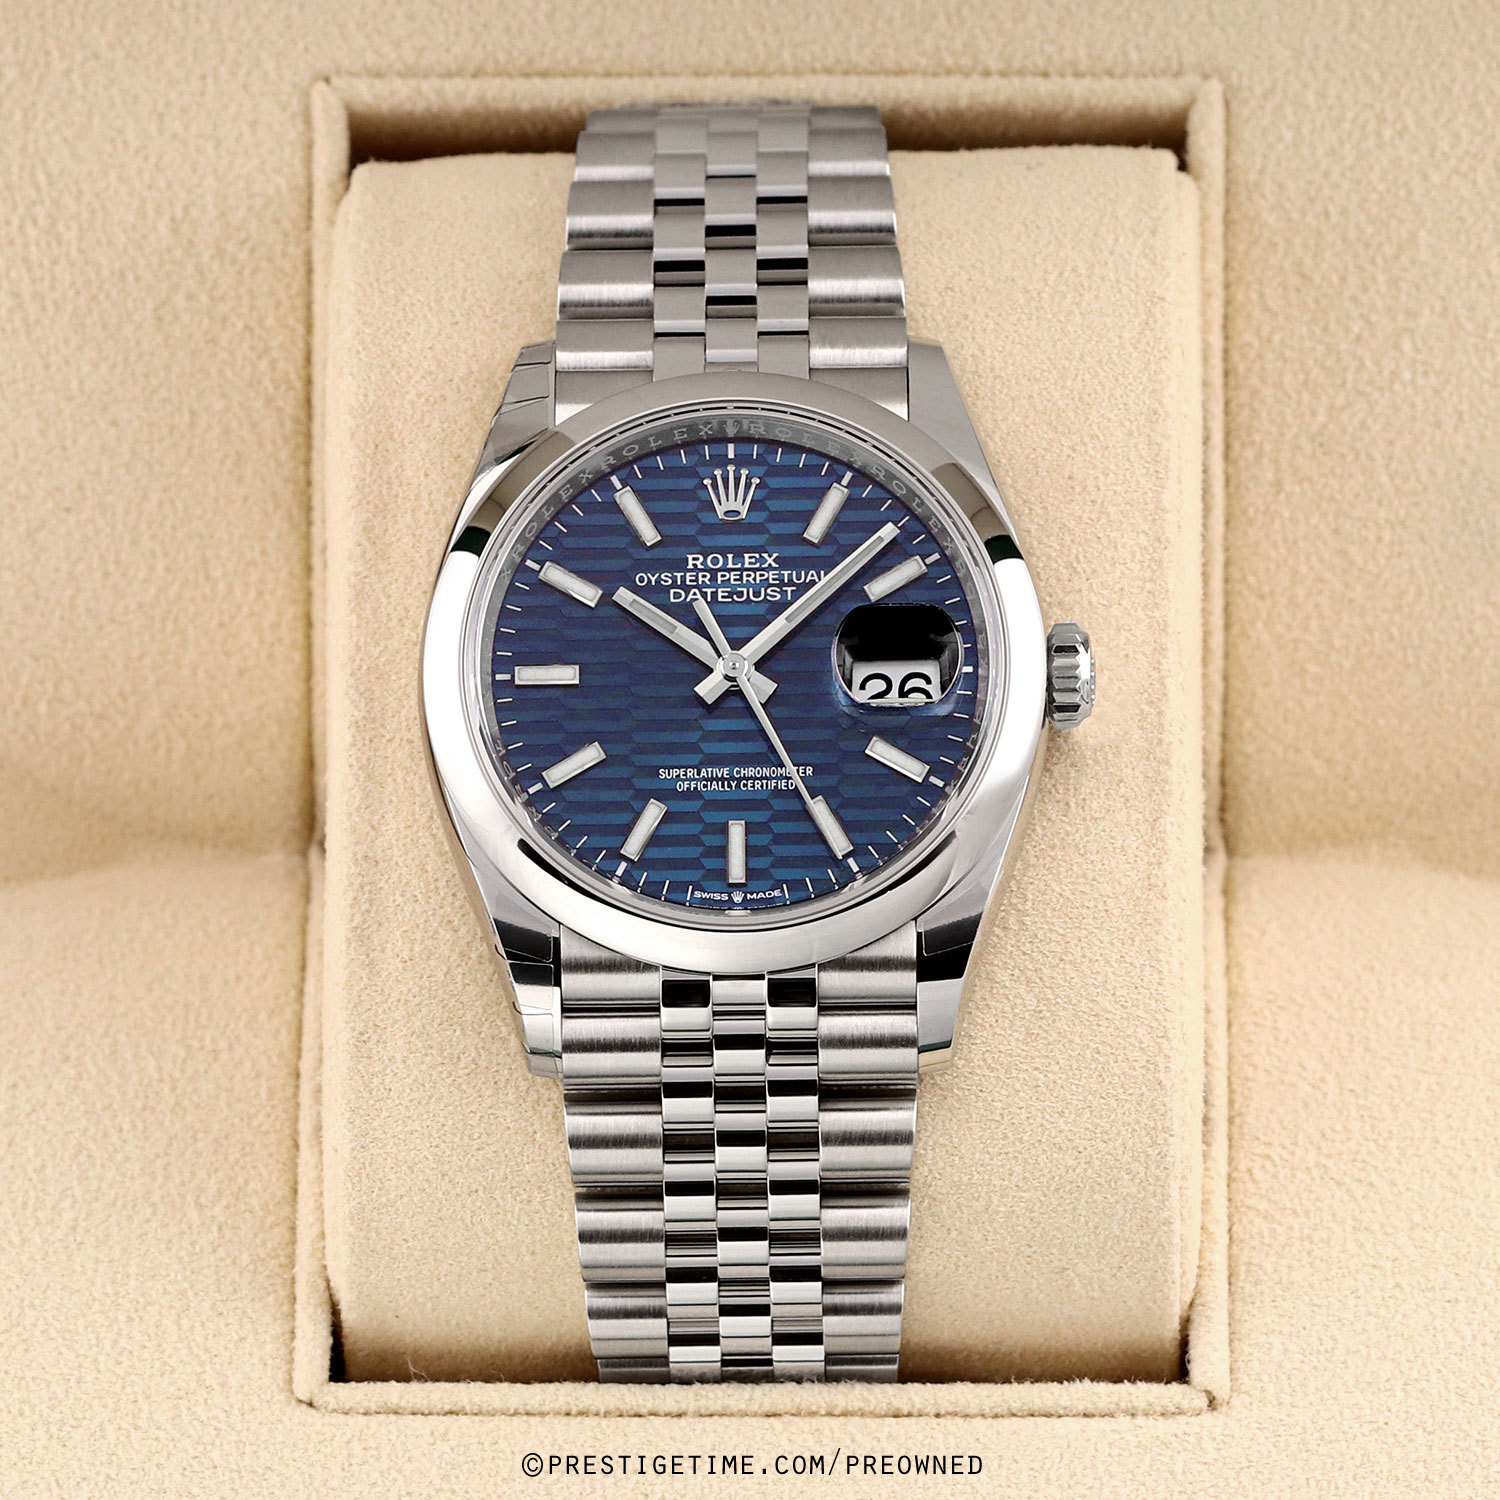 Preowned Rolex Datejust 36mm Bright Blue Fluted Motif 126200 Jubilee